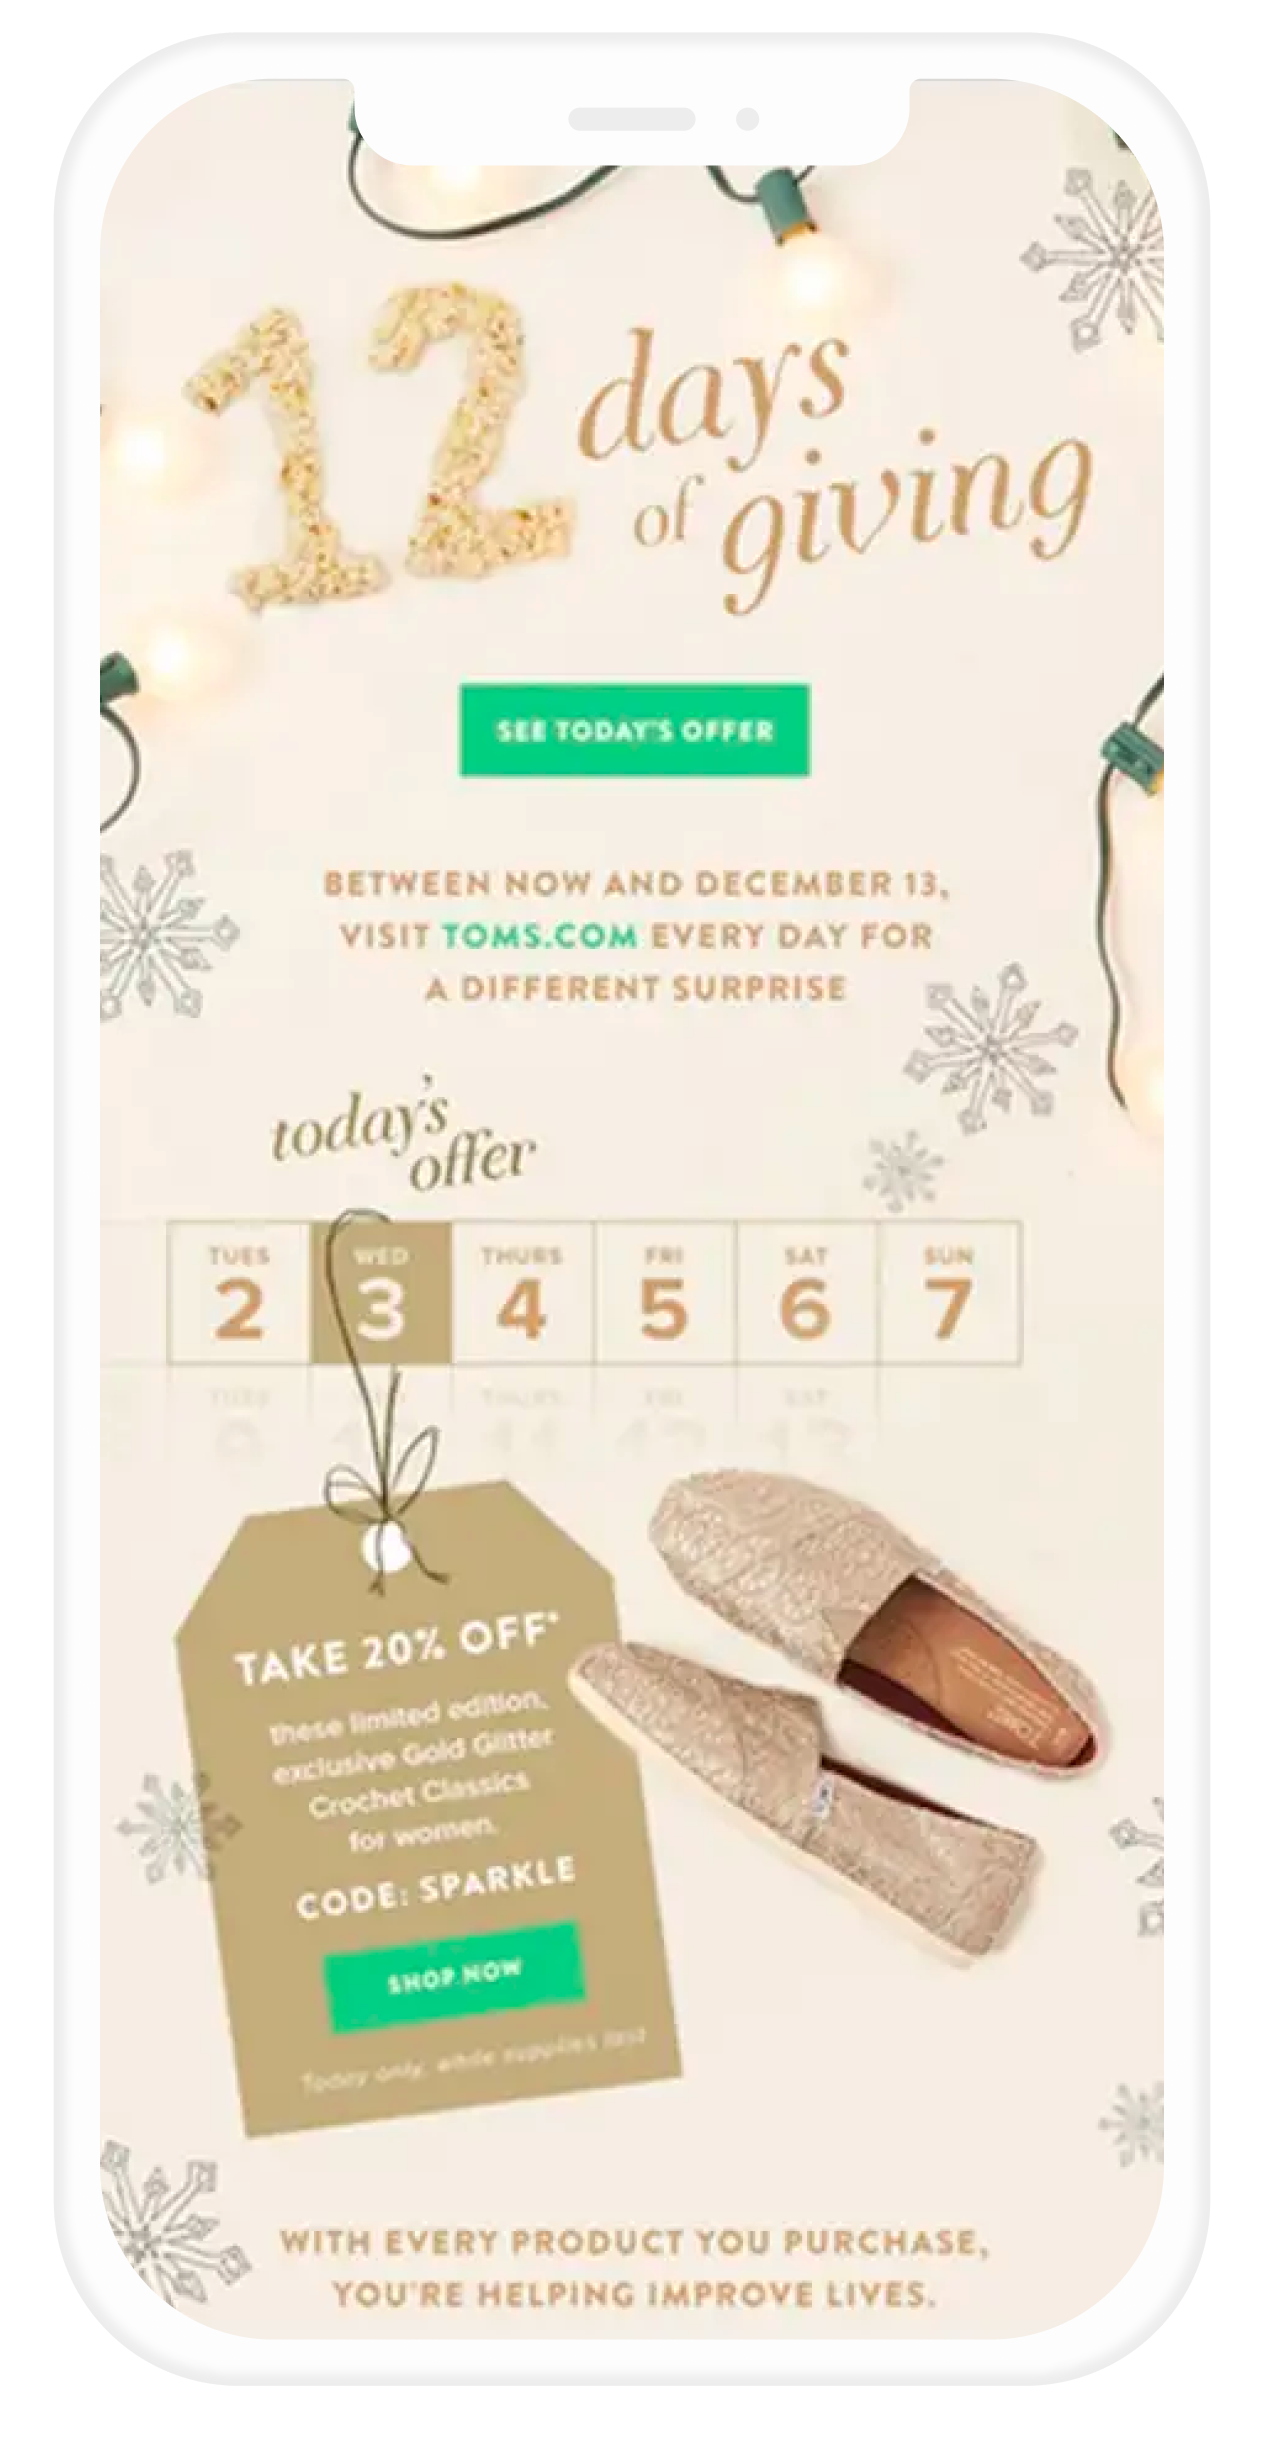 Email from TOMS with an advent calendar of offers.